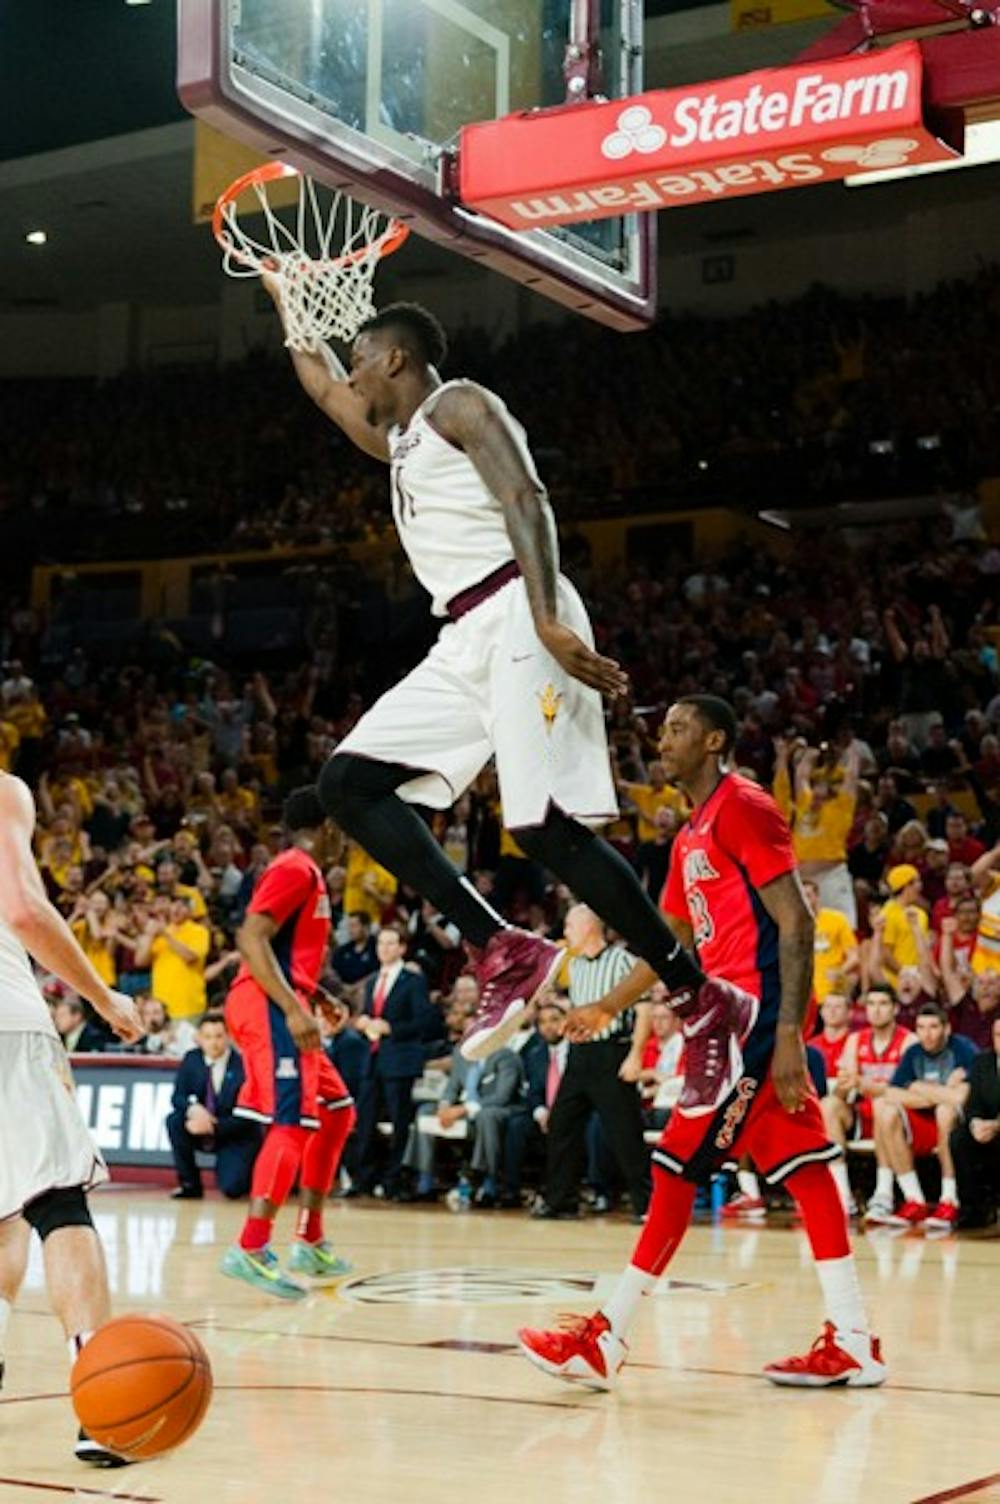 Sophomore forward Savon Goodman alley-oops the ball in the first half against Arizona, Saturday, Feb. 7, 2015 at Wells Fargo Arena in Tempe. The Sun Devils defeated the Wildcats 81-78. (Ben Moffat/The State Press)